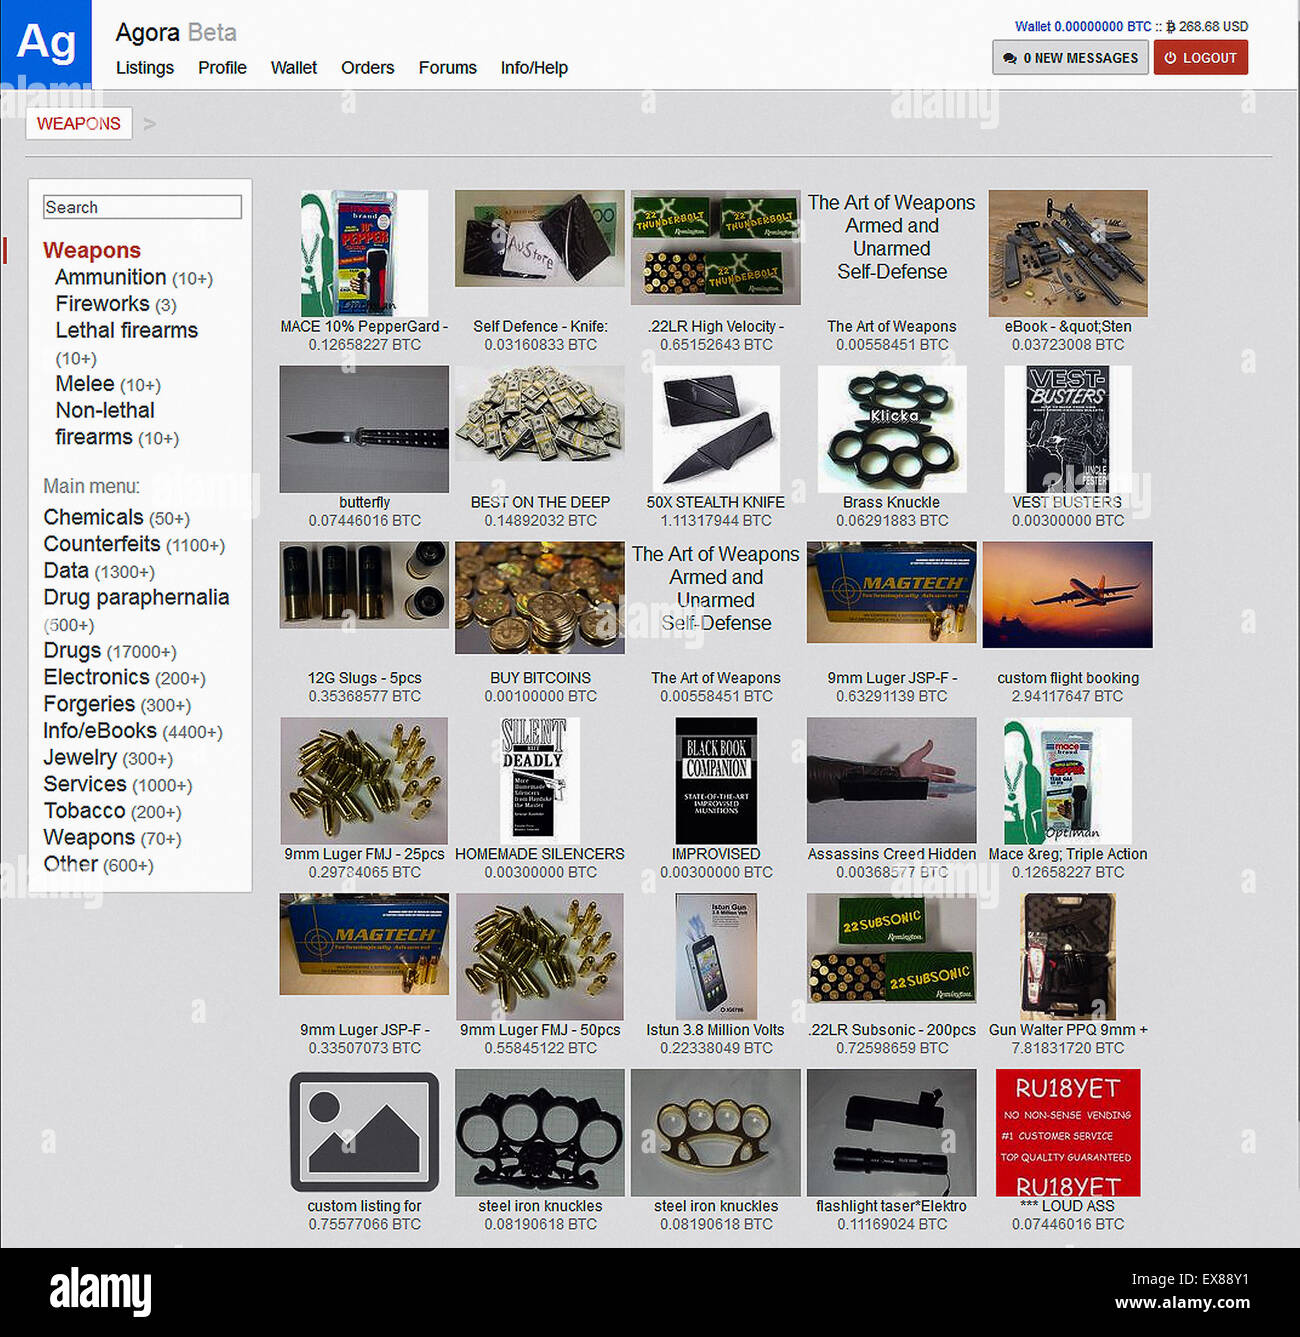 Agora Marketplace for illicit goods (drugs, counterfeits, weapons) established 3 December 2013 accessed on the darknet (Tor network). Weapons category homepage shown with subcategories listed on left, images of various weapons and ammunitions. Date taken: July 2014. The marketplace closed for business in August 2015 stating potential vulnerabilities in Tor Hidden Services protocol which could help to deanonymize server locations. Stock Photo